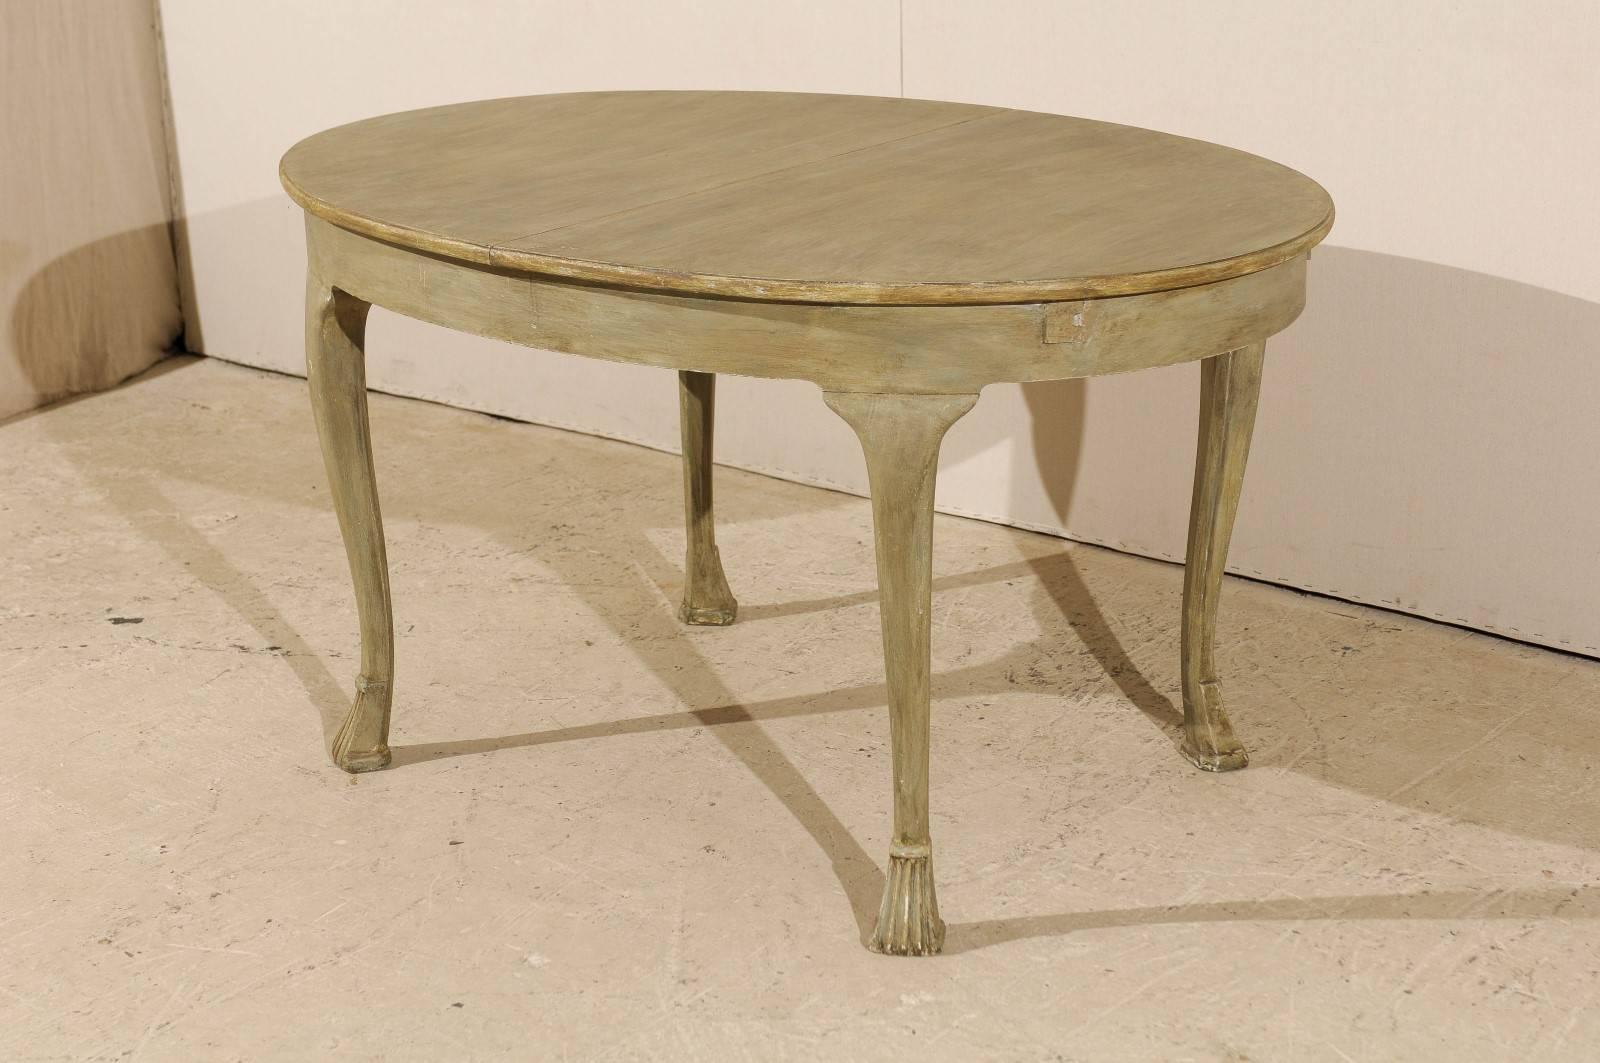 19th Century European Painted Oval Wood Table with Hideaway Leaves, circa 1880 1